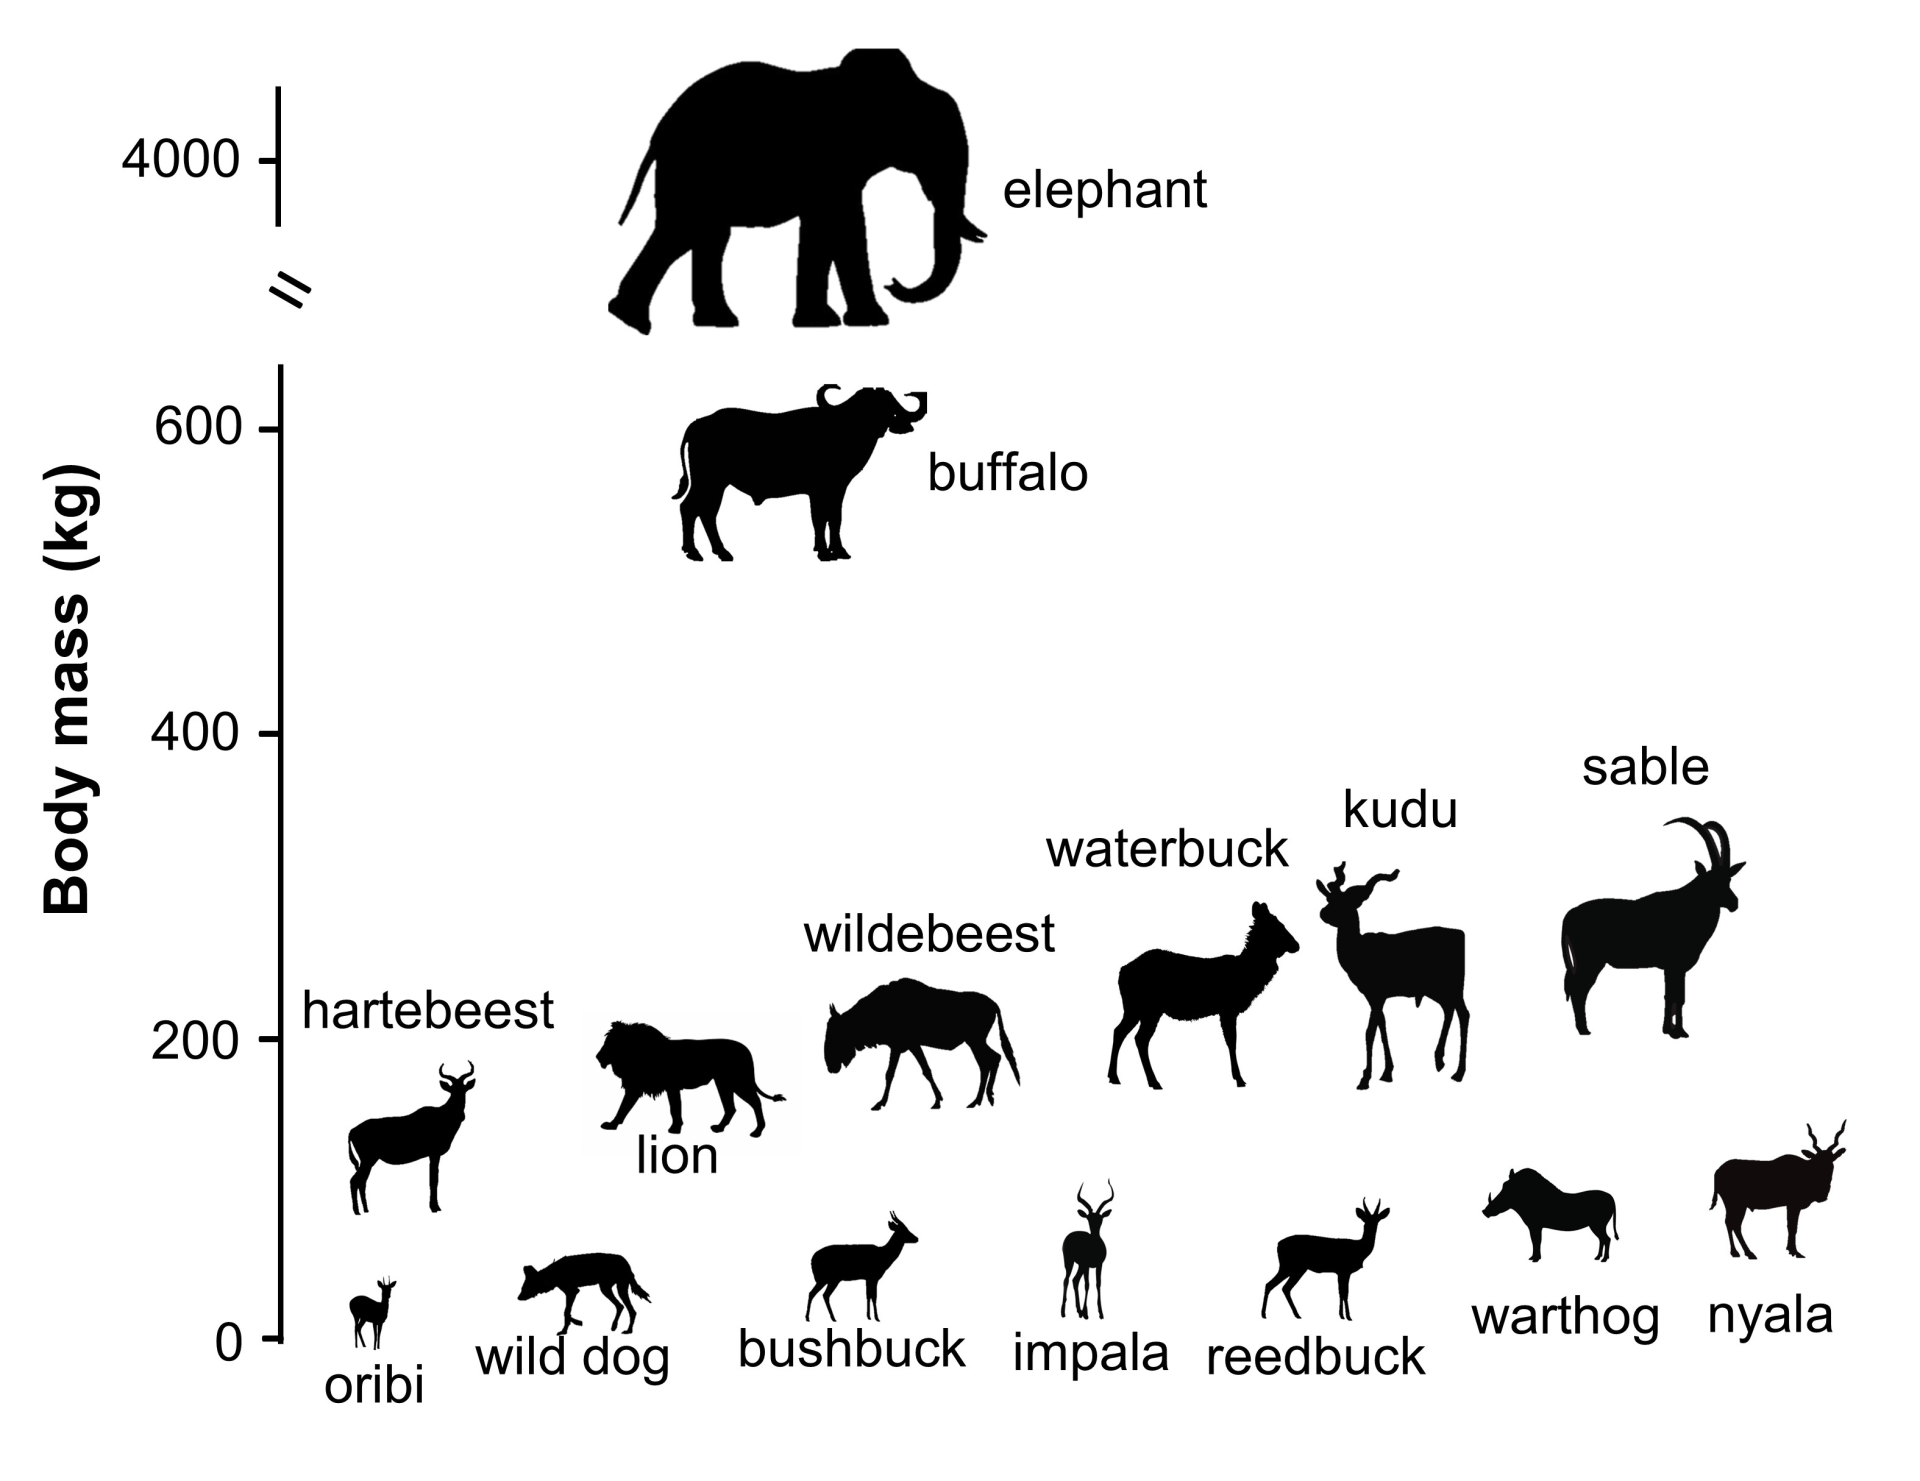 A simple chart showing the relative animal sizes of all the animals at Gorongosa 